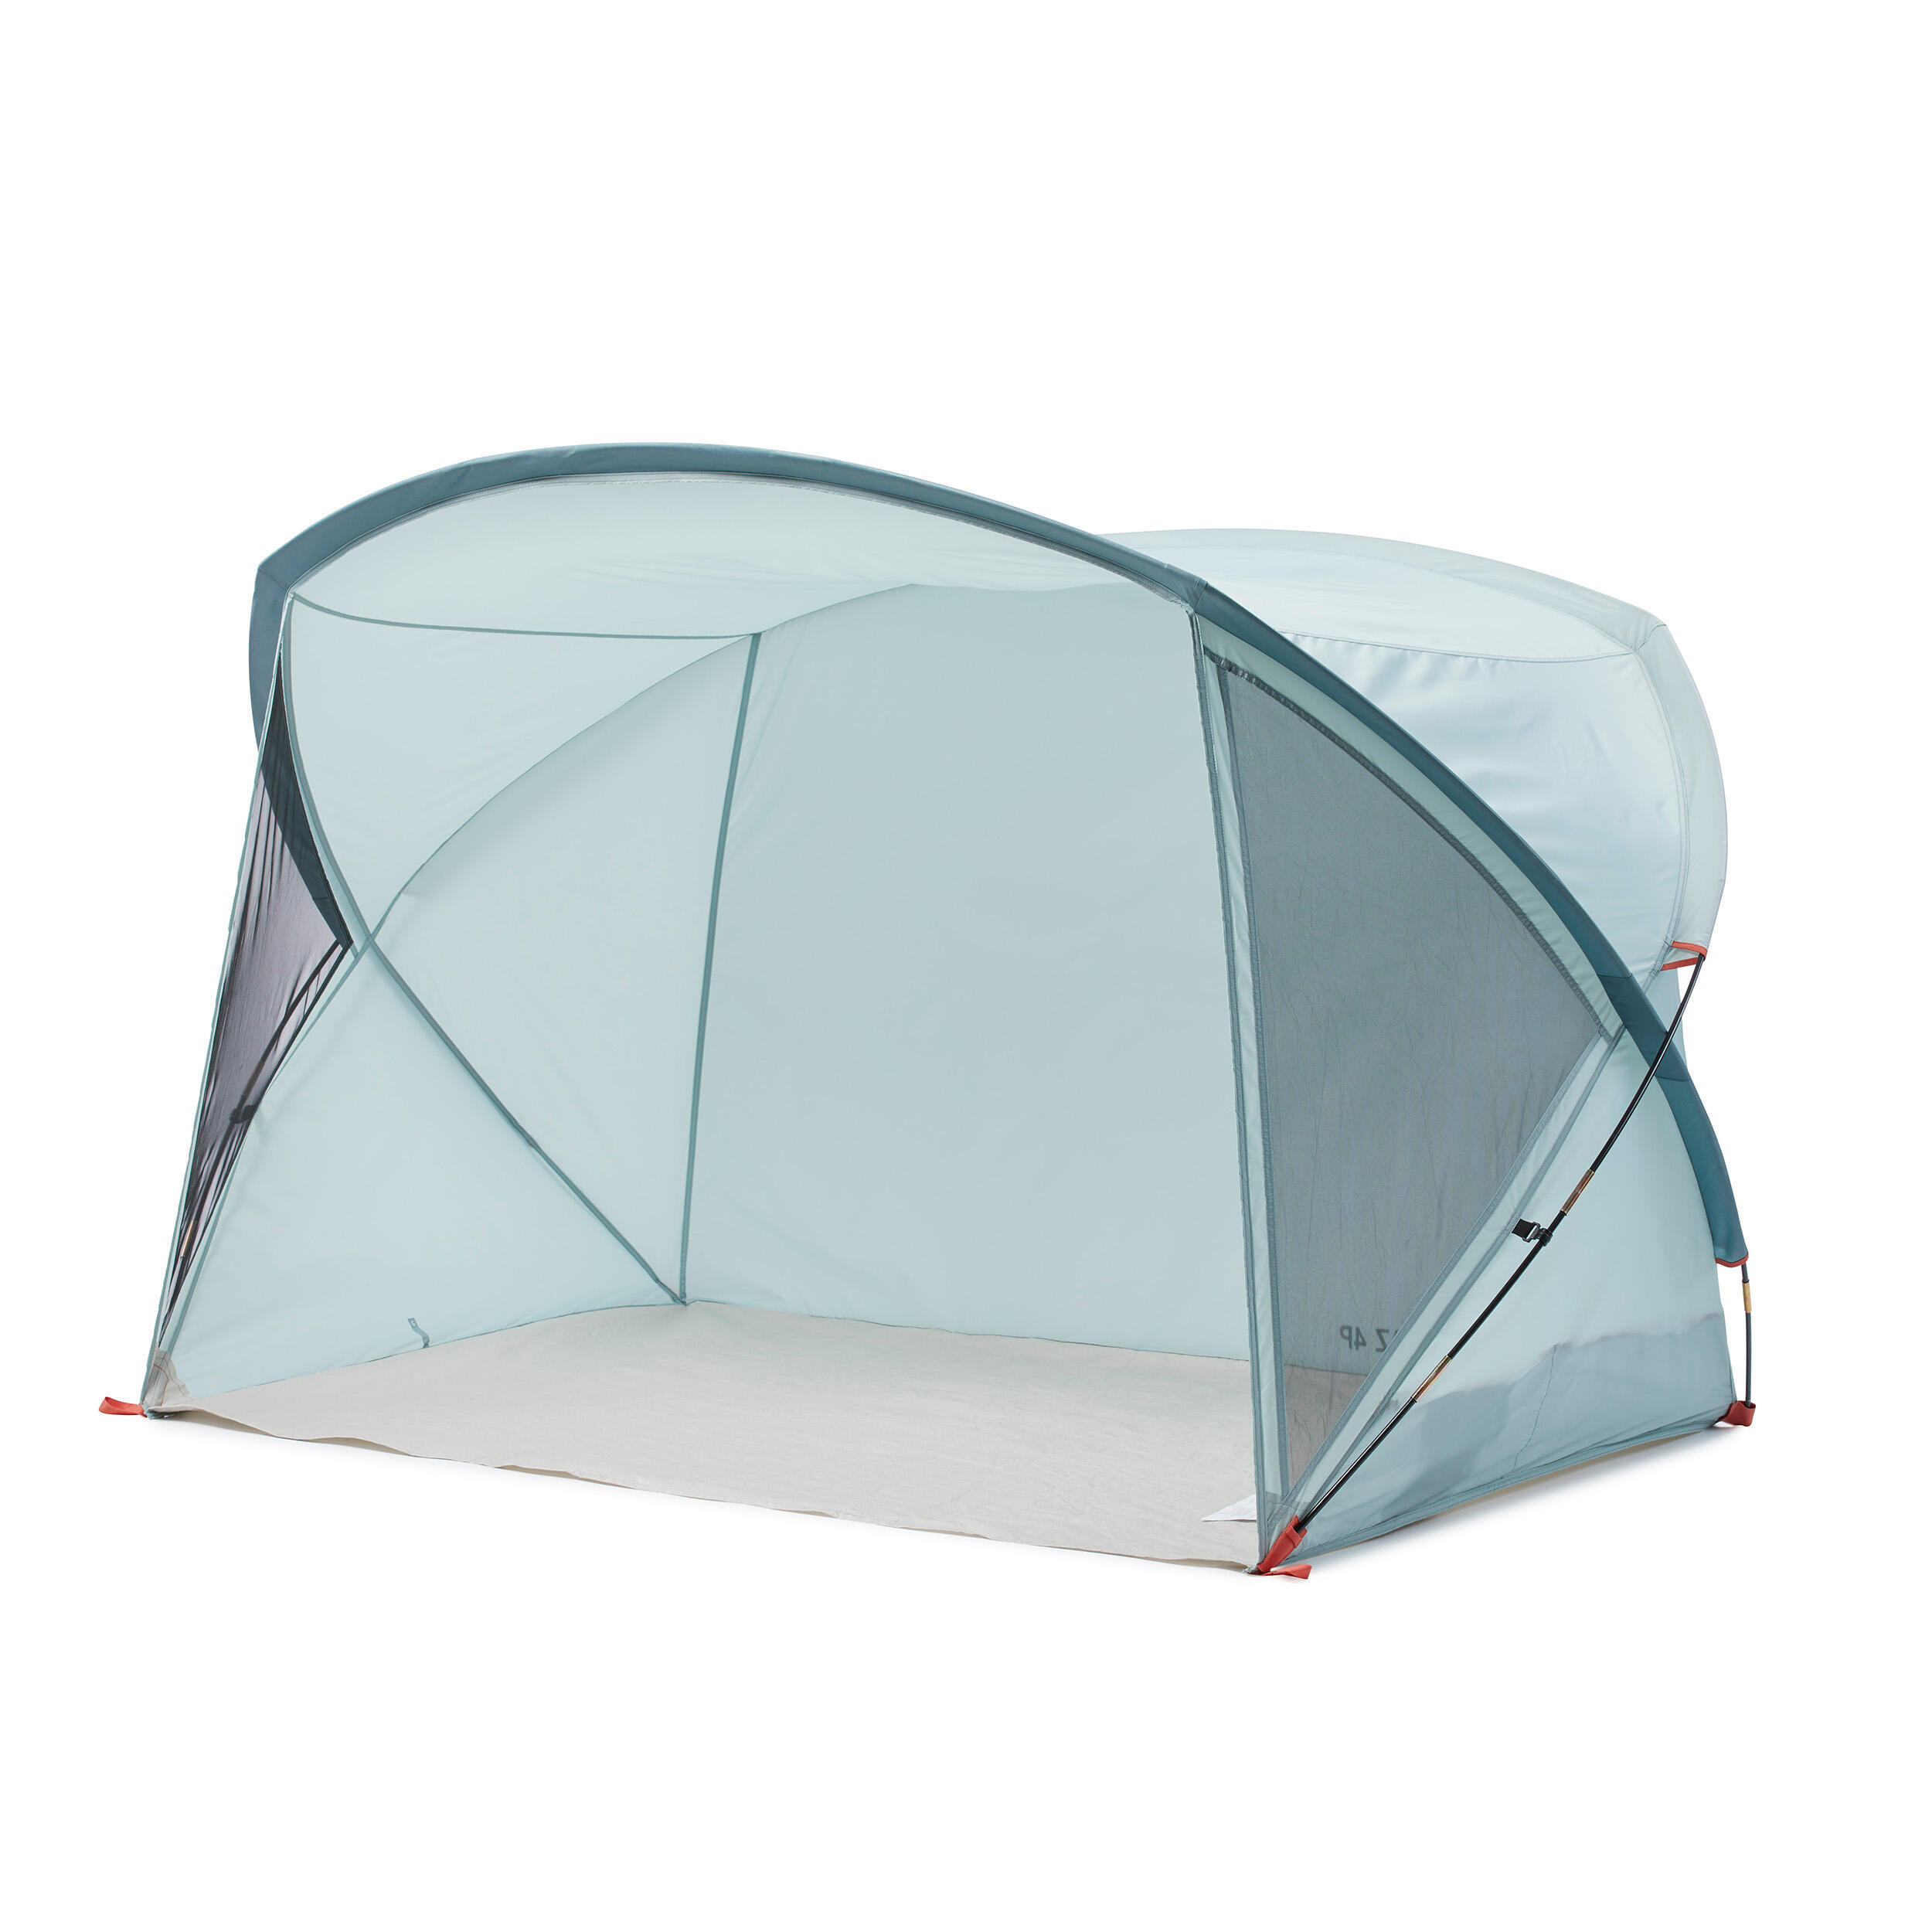 Camping Shelter with Poles - 4 person - Arpenaz 4P 1/10